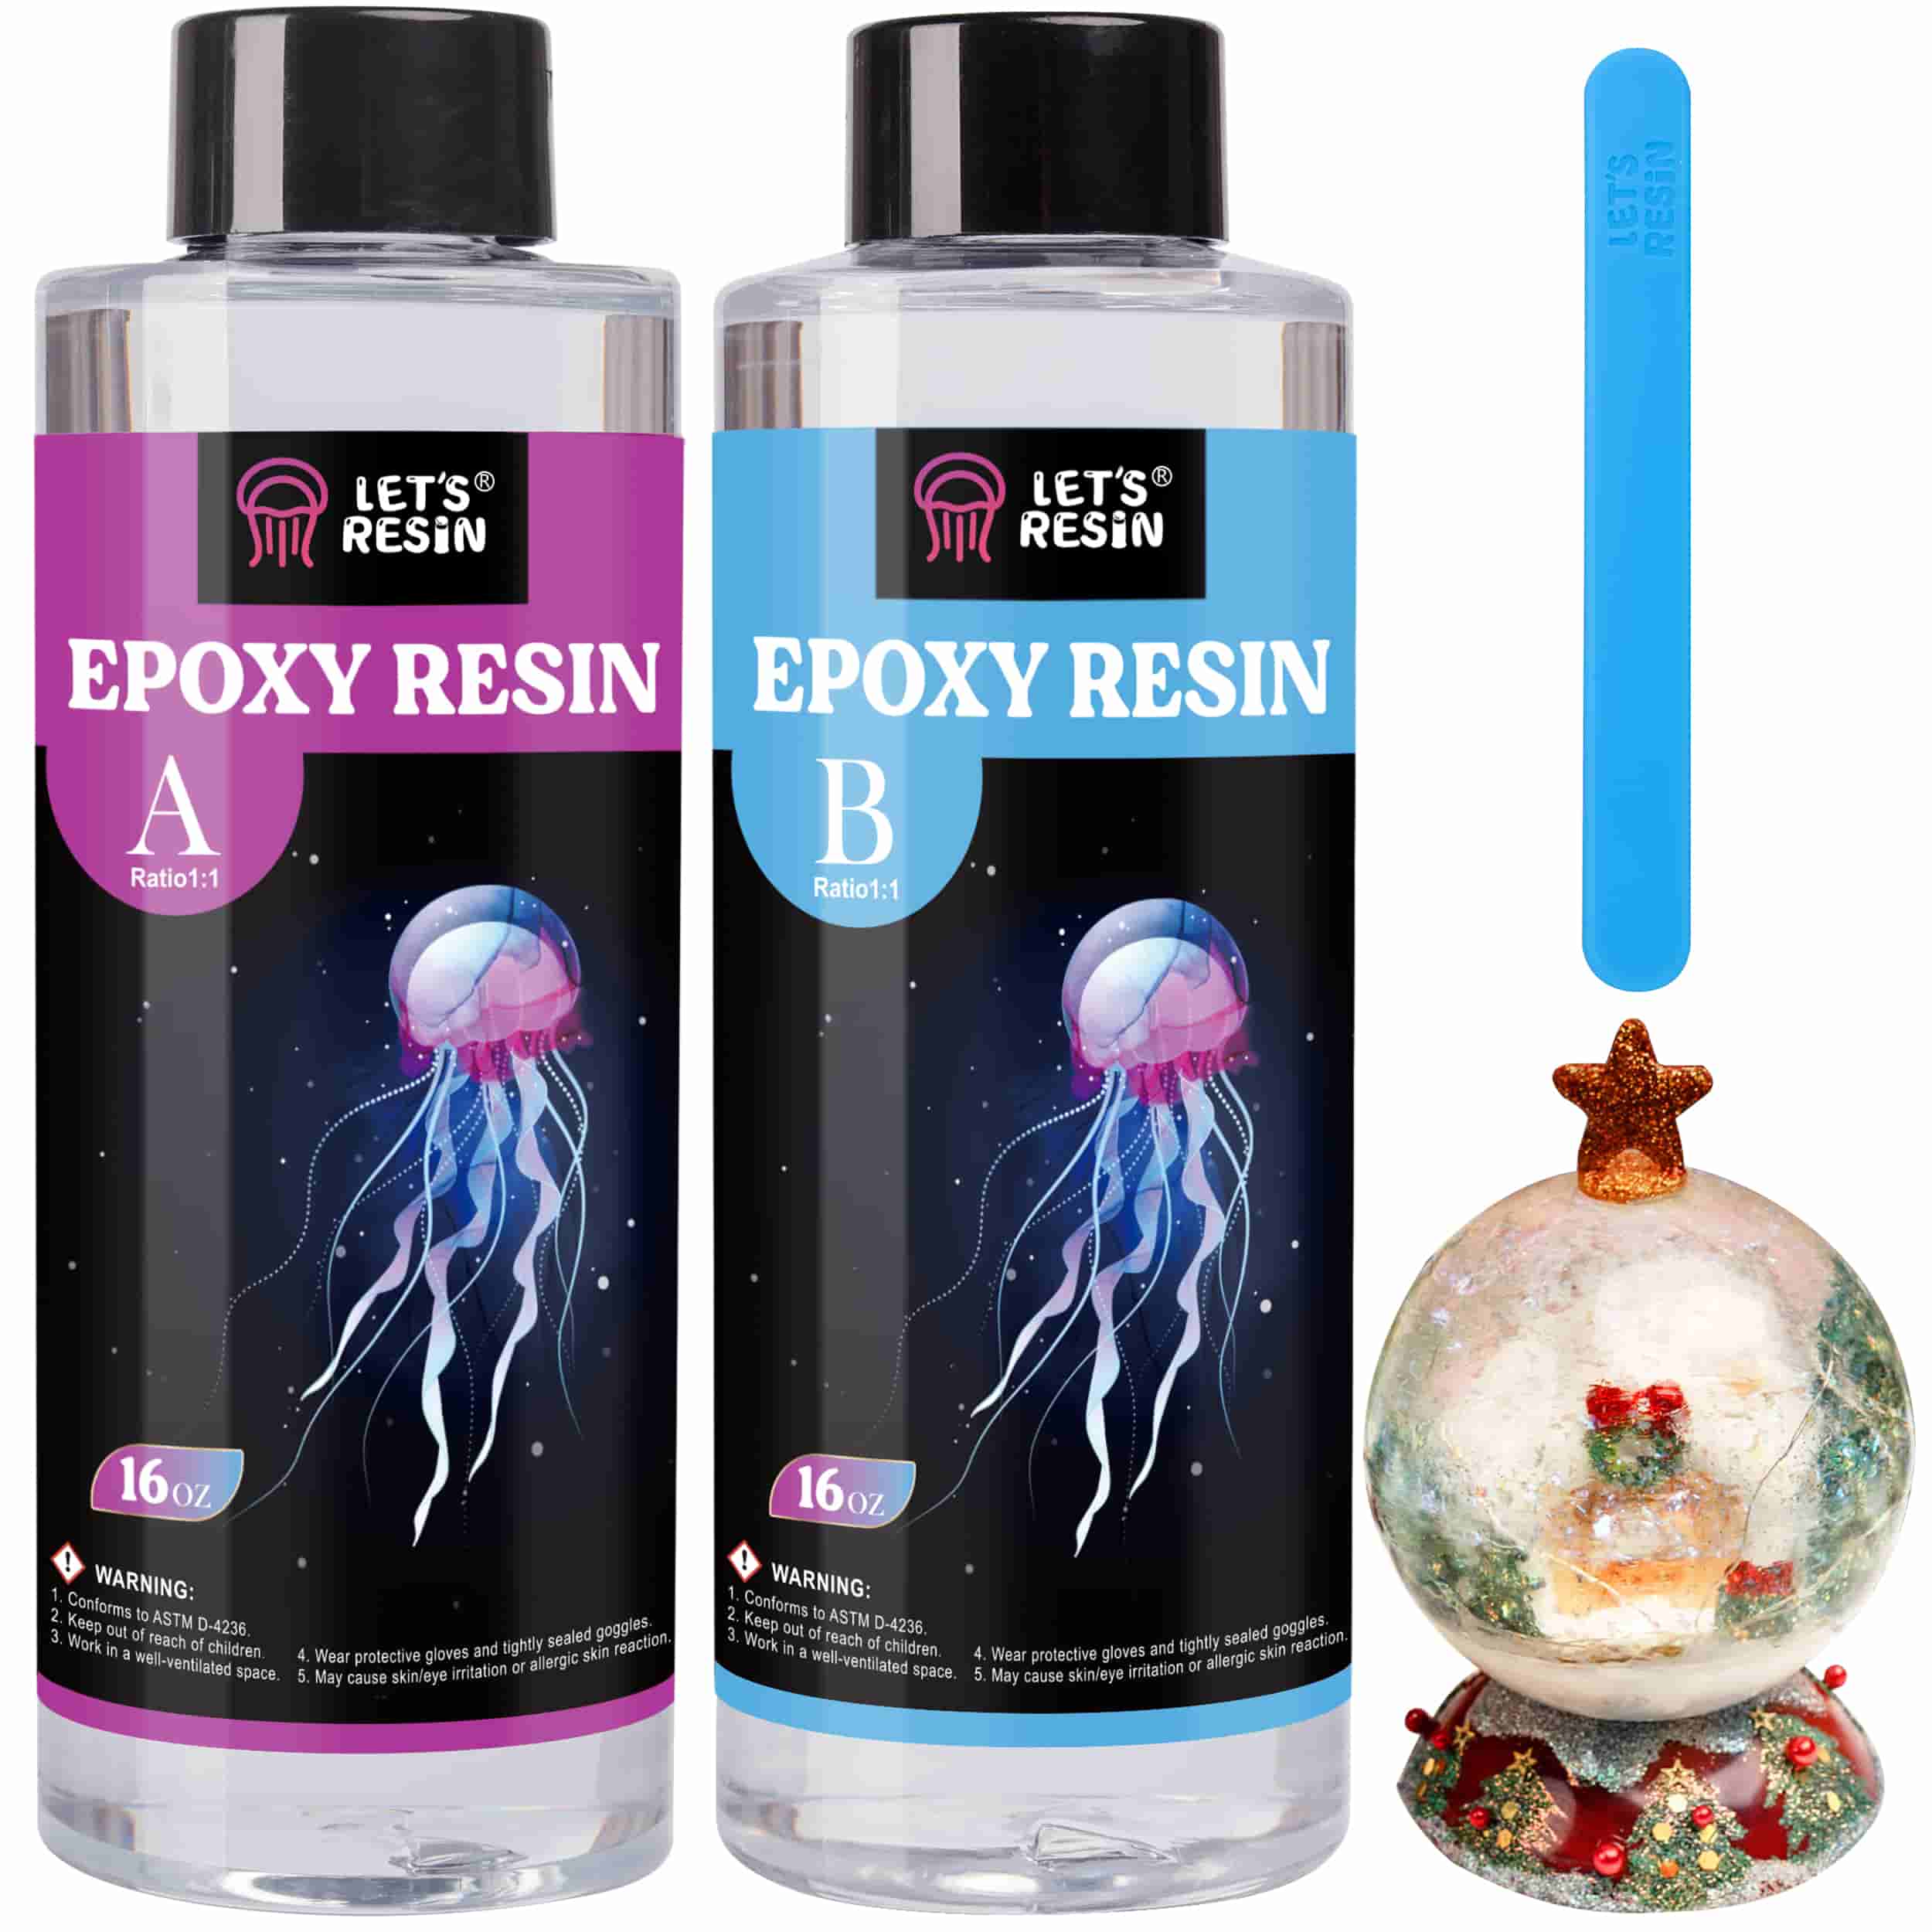 Clear Epoxy Resin - 1:1 Ratio Art Resin for Casting, Coating